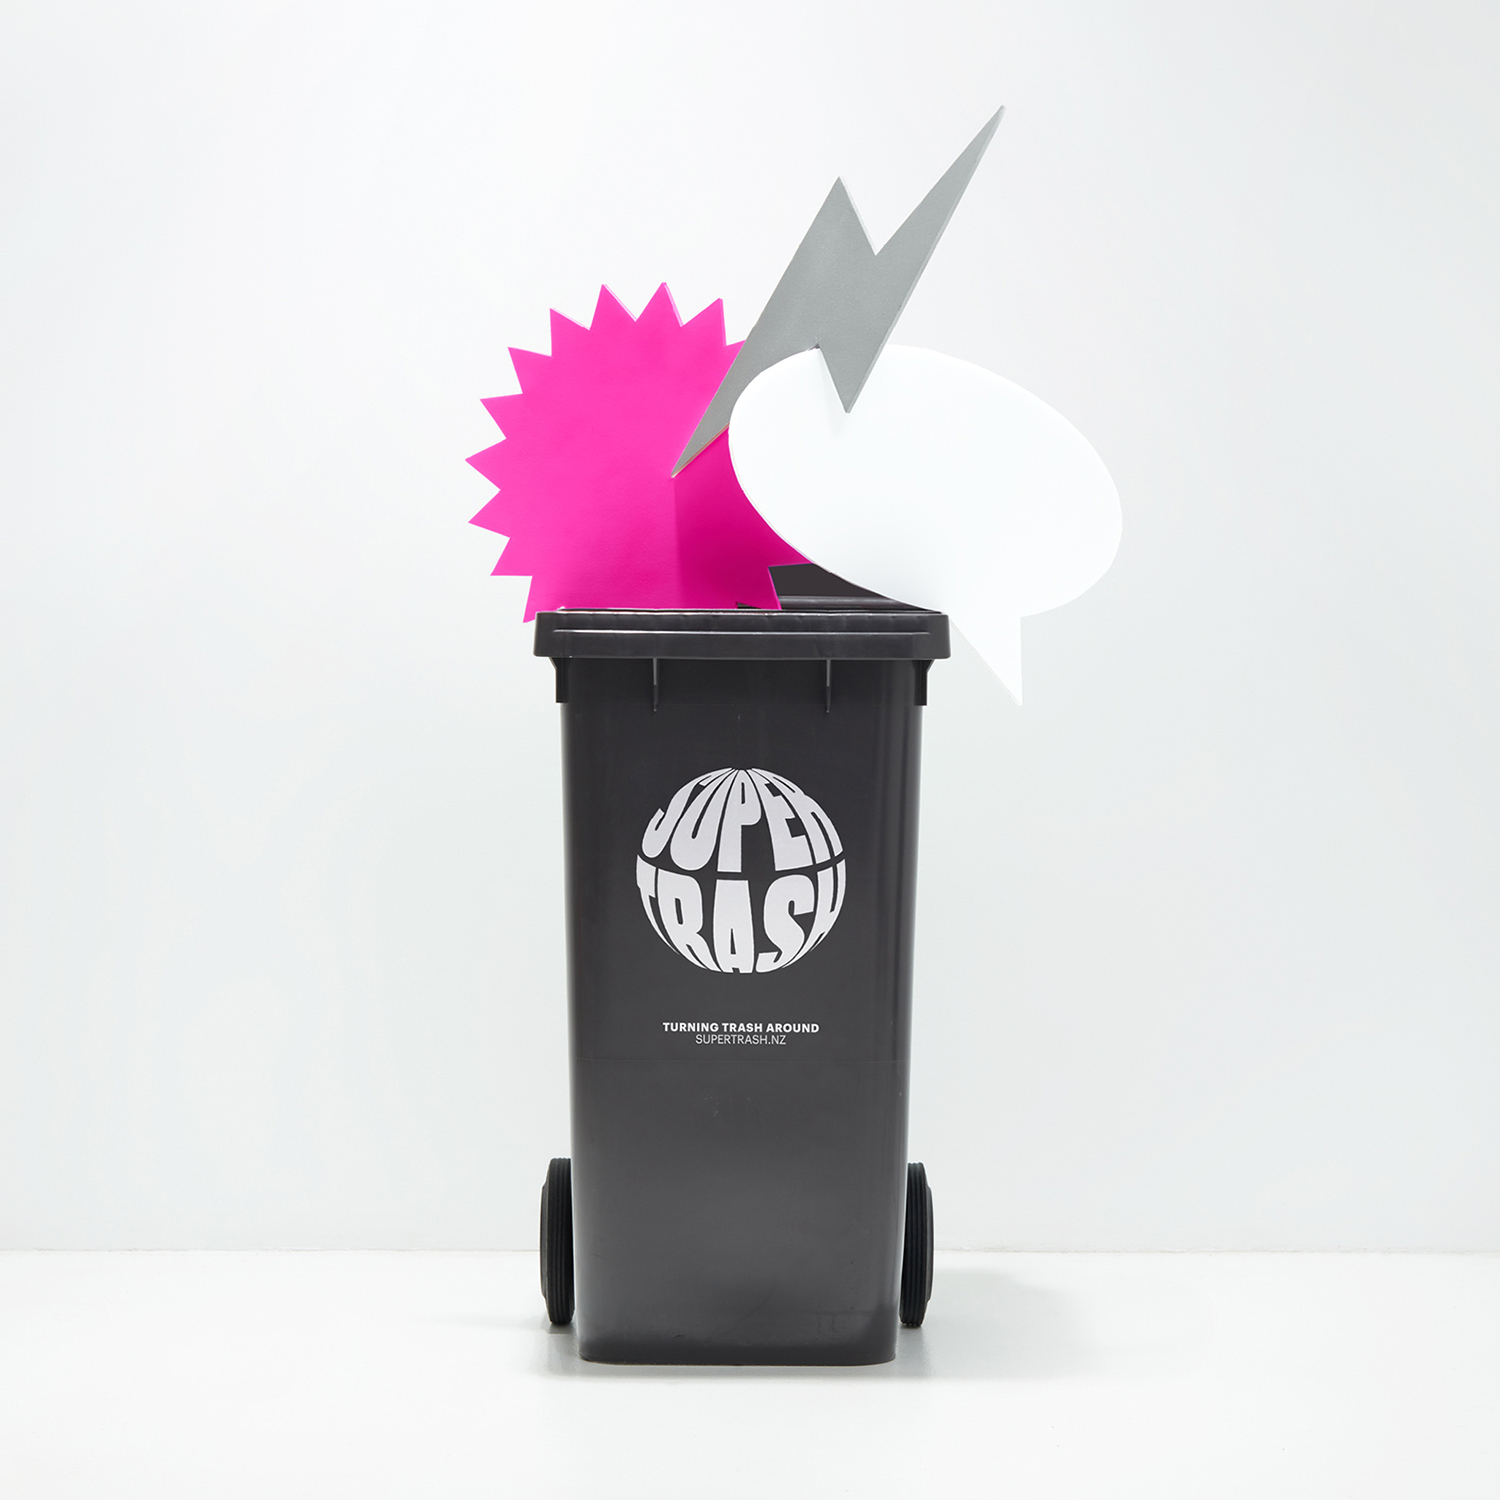 Logo and branded refuse bin by Seachange for refuse collection and reuse company Supertrash